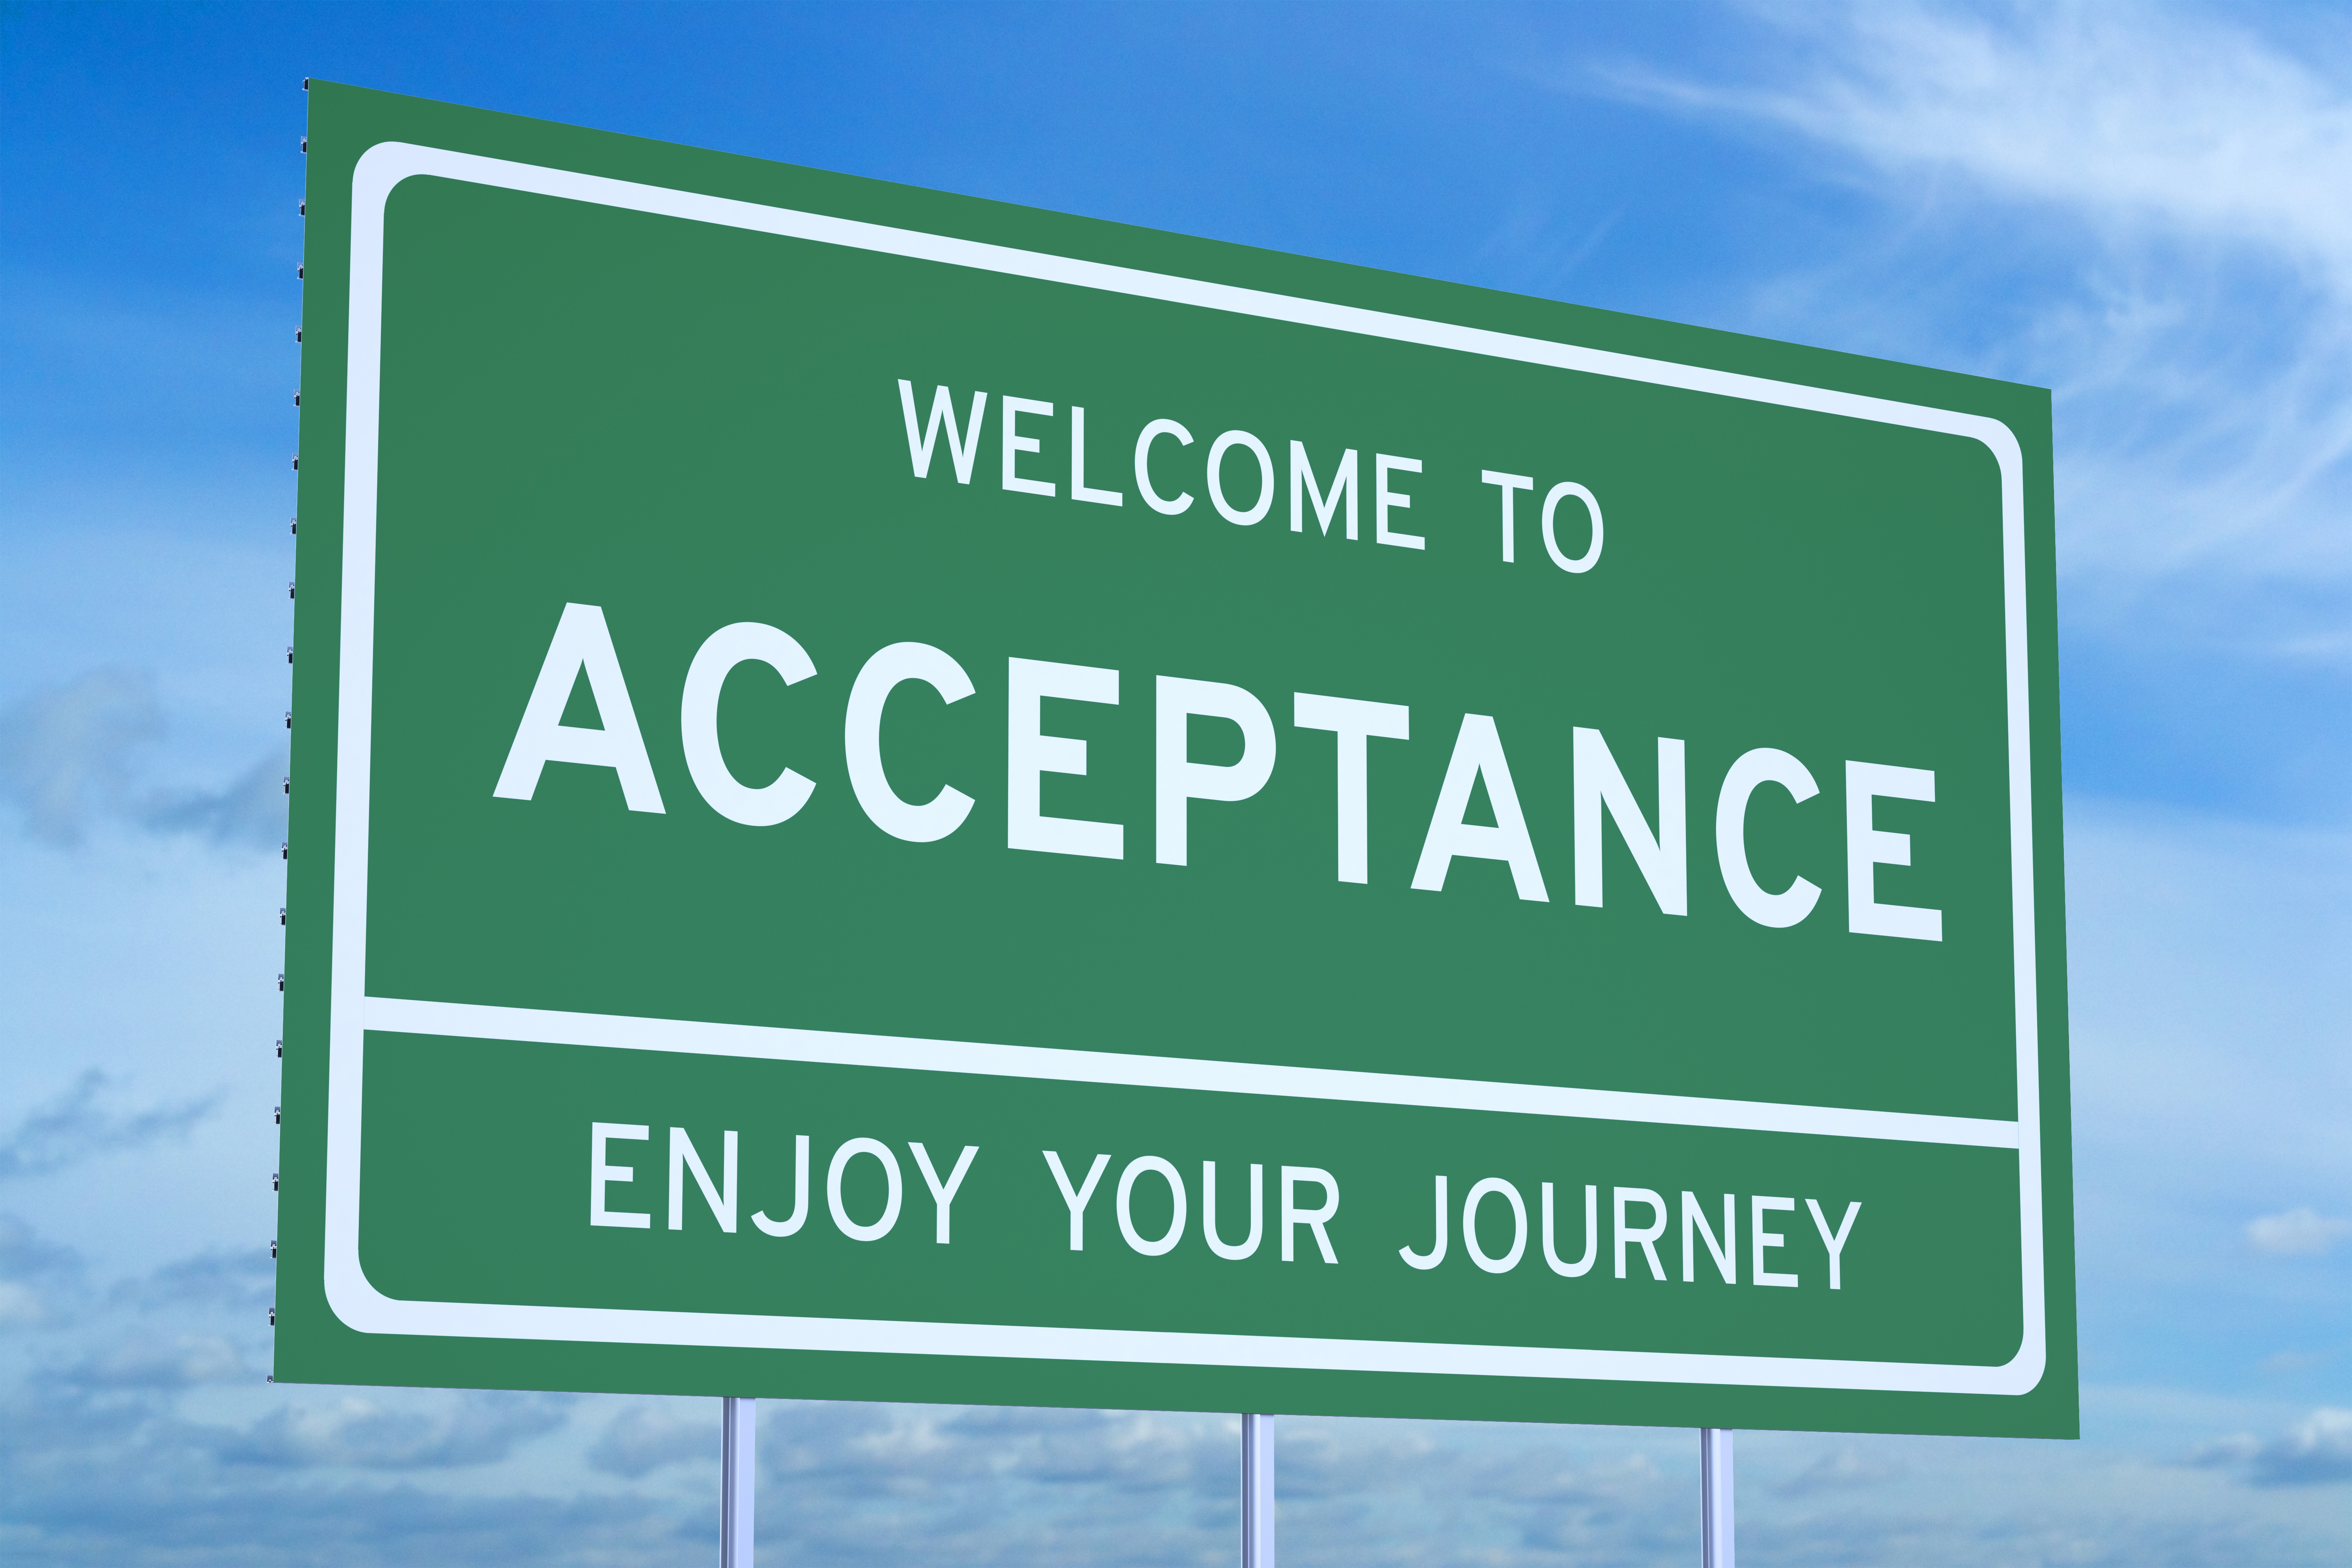 Reflections on Leadership: Acceptance and Belonging